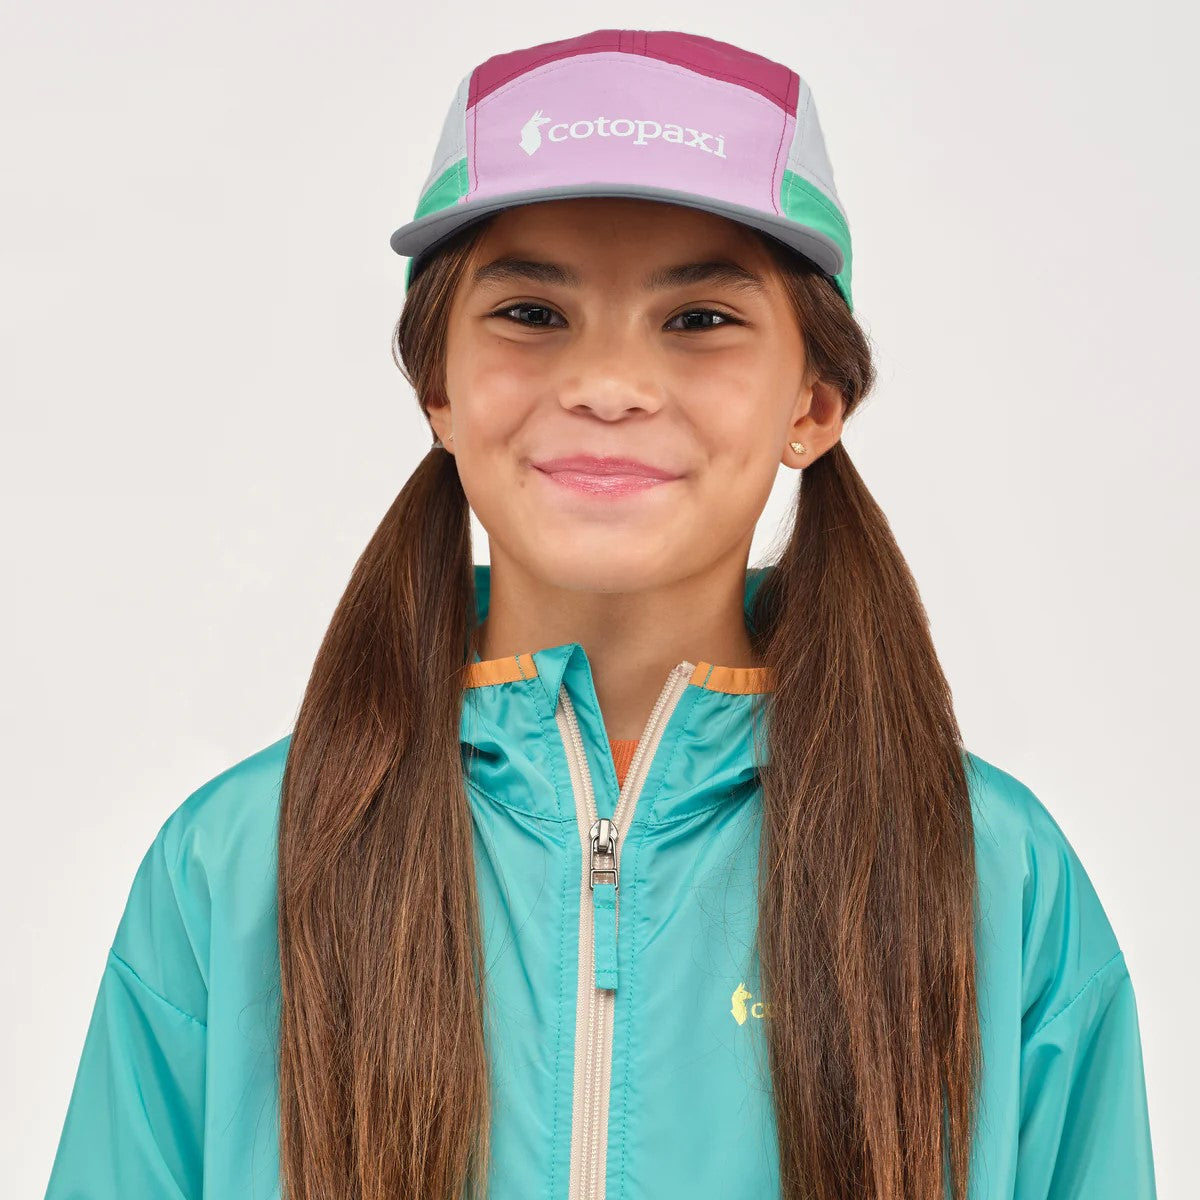 Tech 5-Panel Kid's Hat - Orchid Bloom